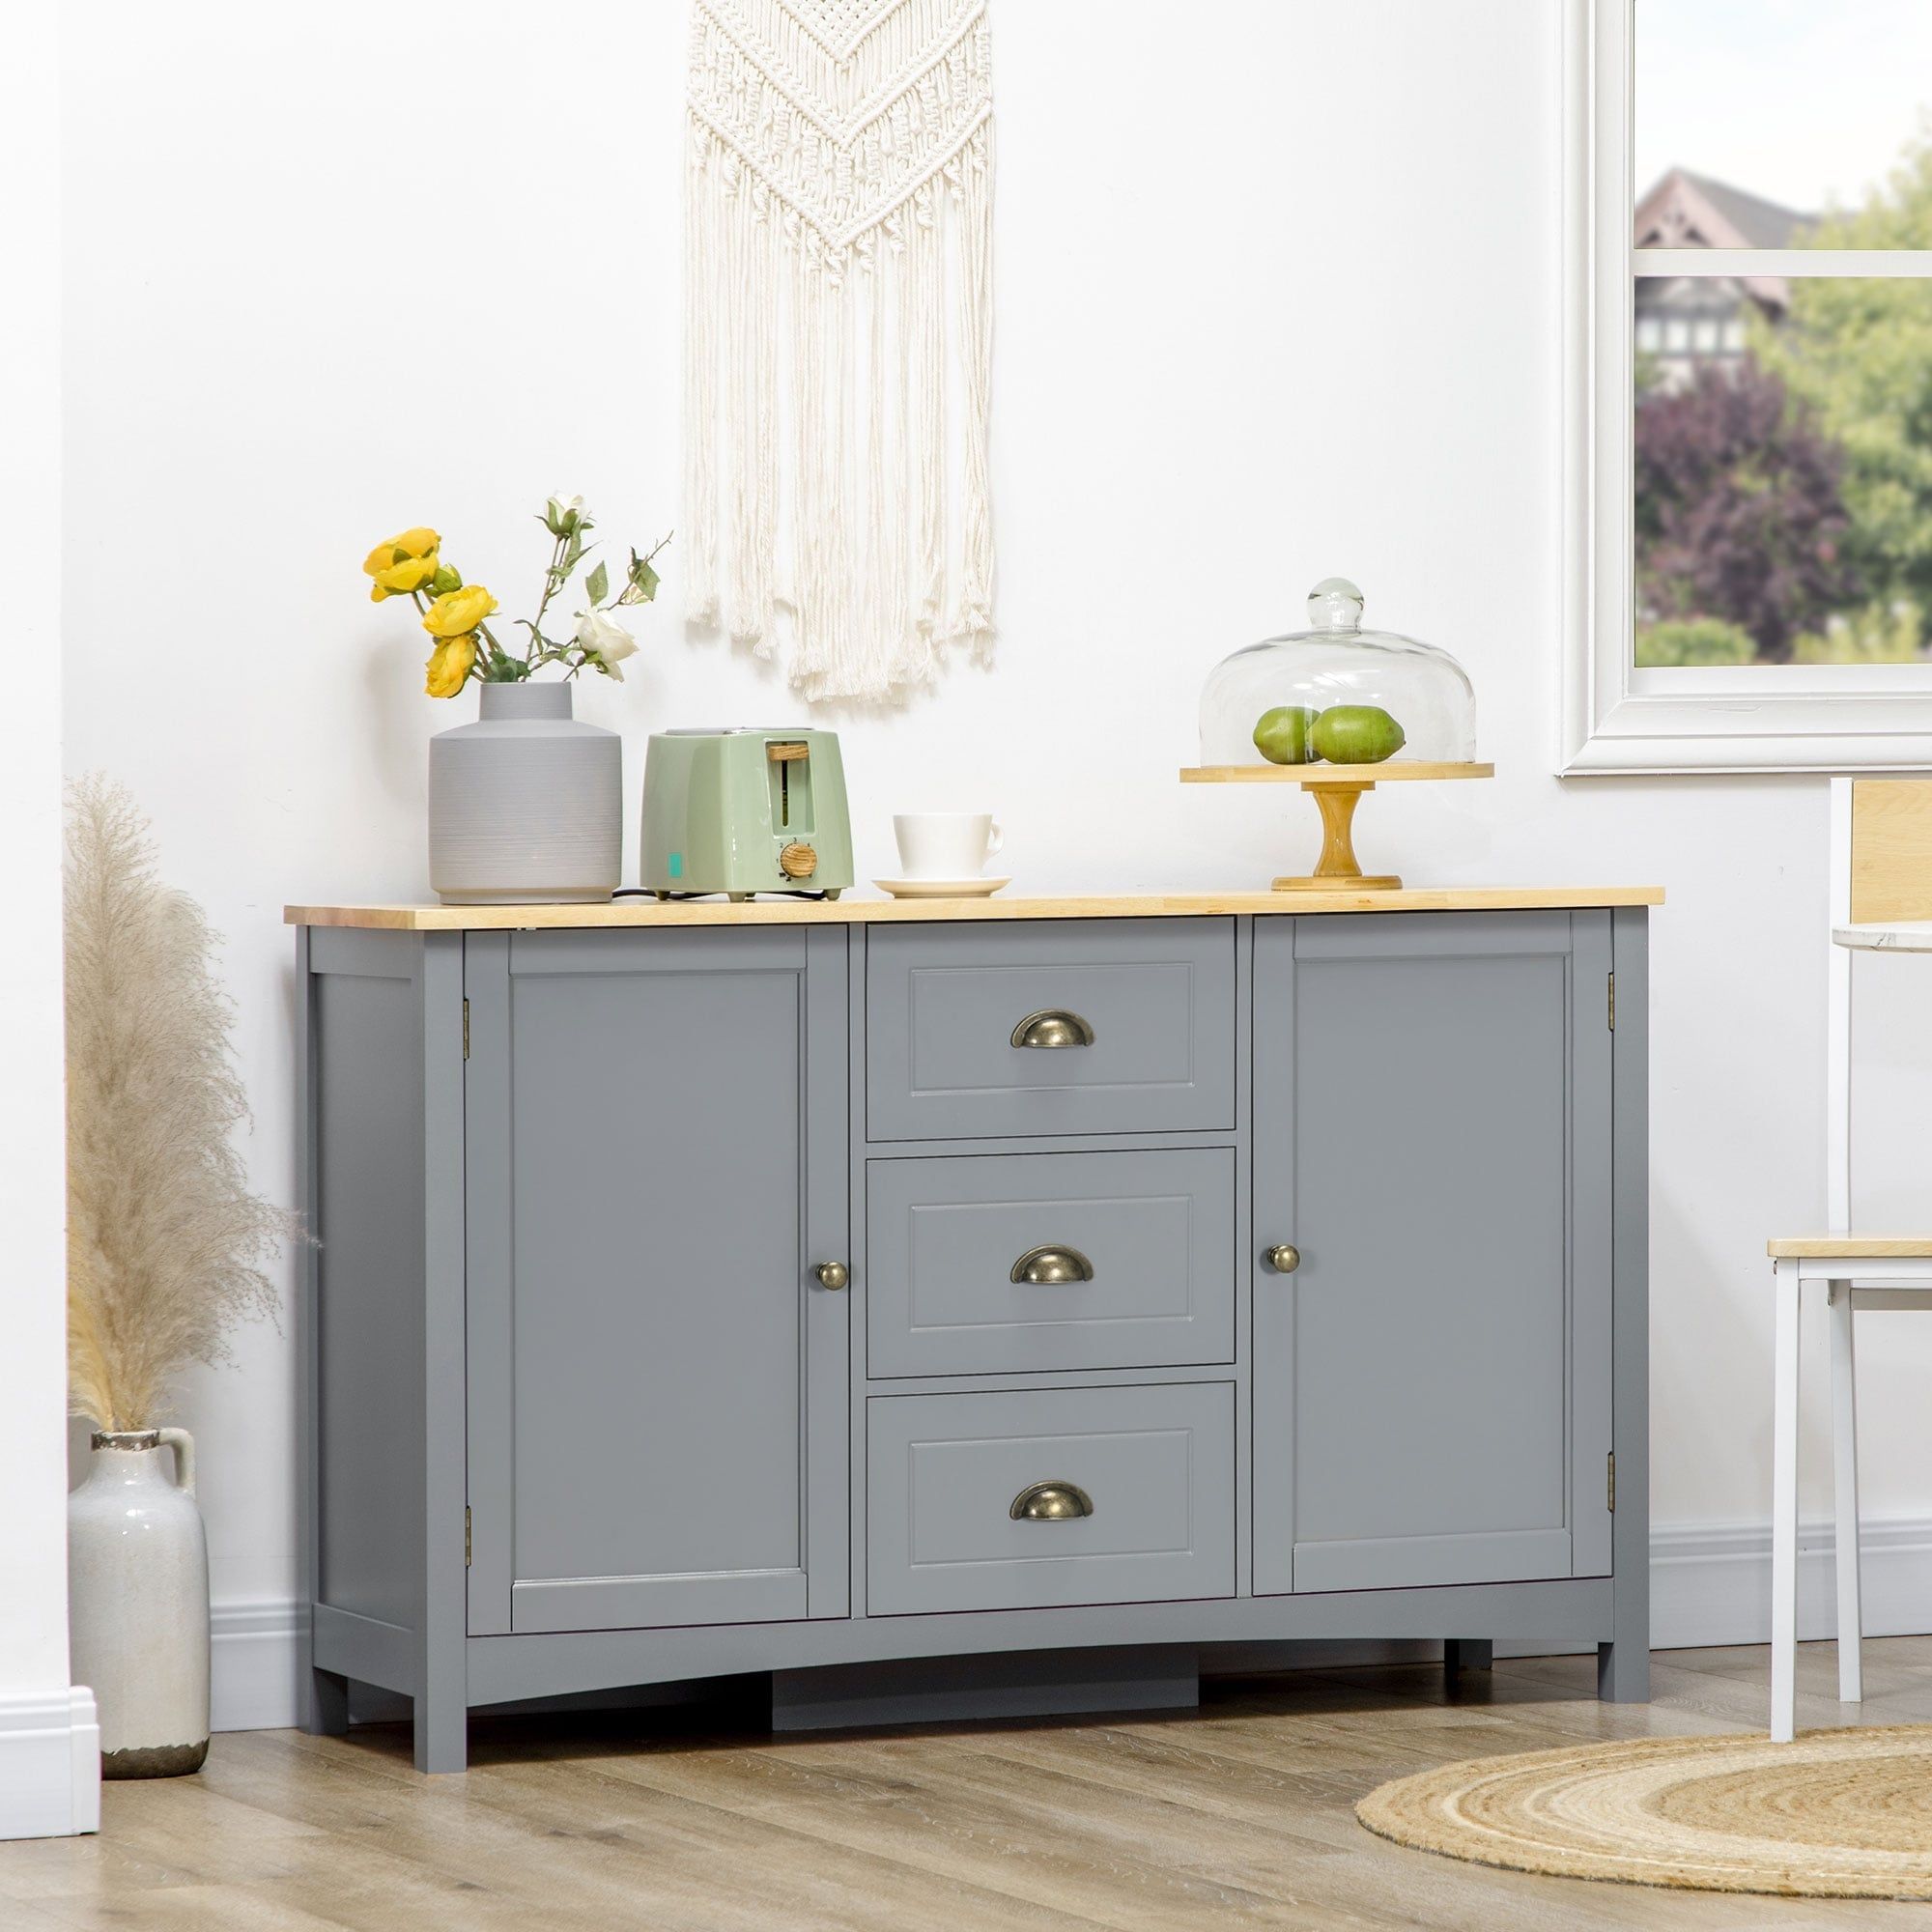 Homcom Sideboard Buffet Cabinet, Retro Kitchen Cabinet, Coffee Bar Cabinet  With Rubber Wood Top, Drawers, Entryway, Gray – Bed Bath & Beyond – 38858360 Throughout Most Up To Date Sideboards With Rubberwood Top (View 8 of 15)